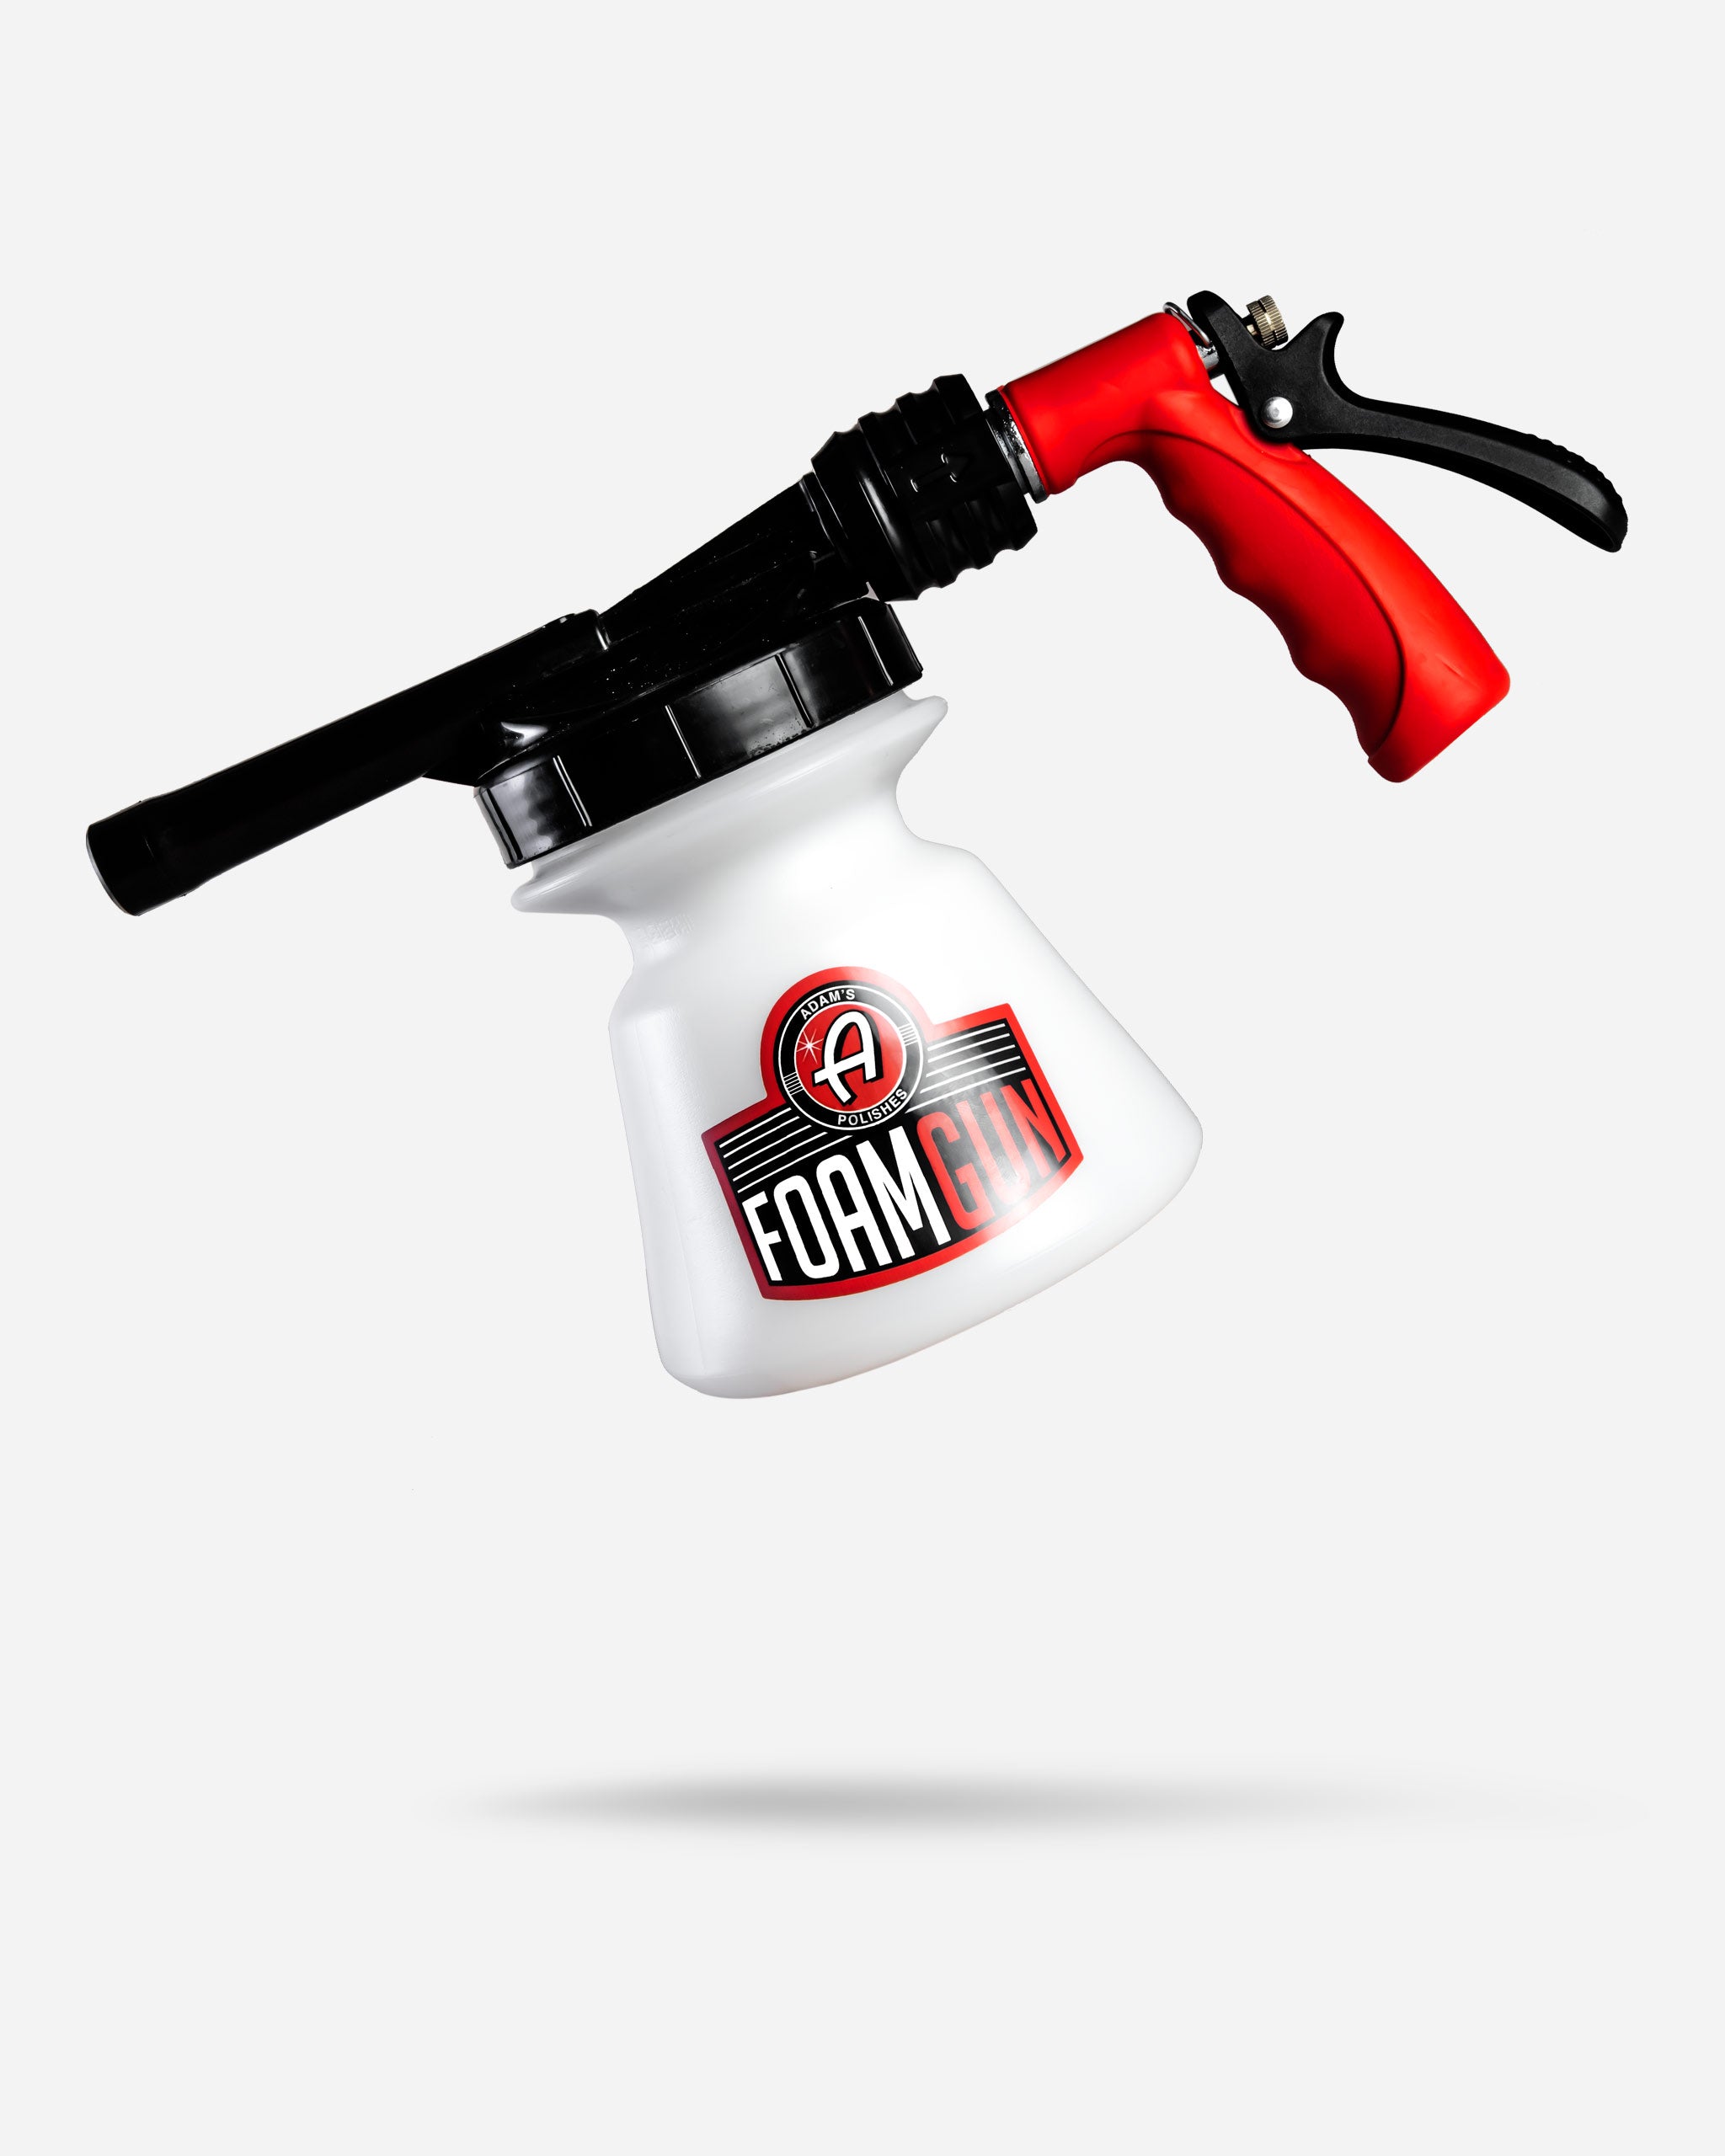 Adams Foam Cannon Car Wash reviews and specifications…